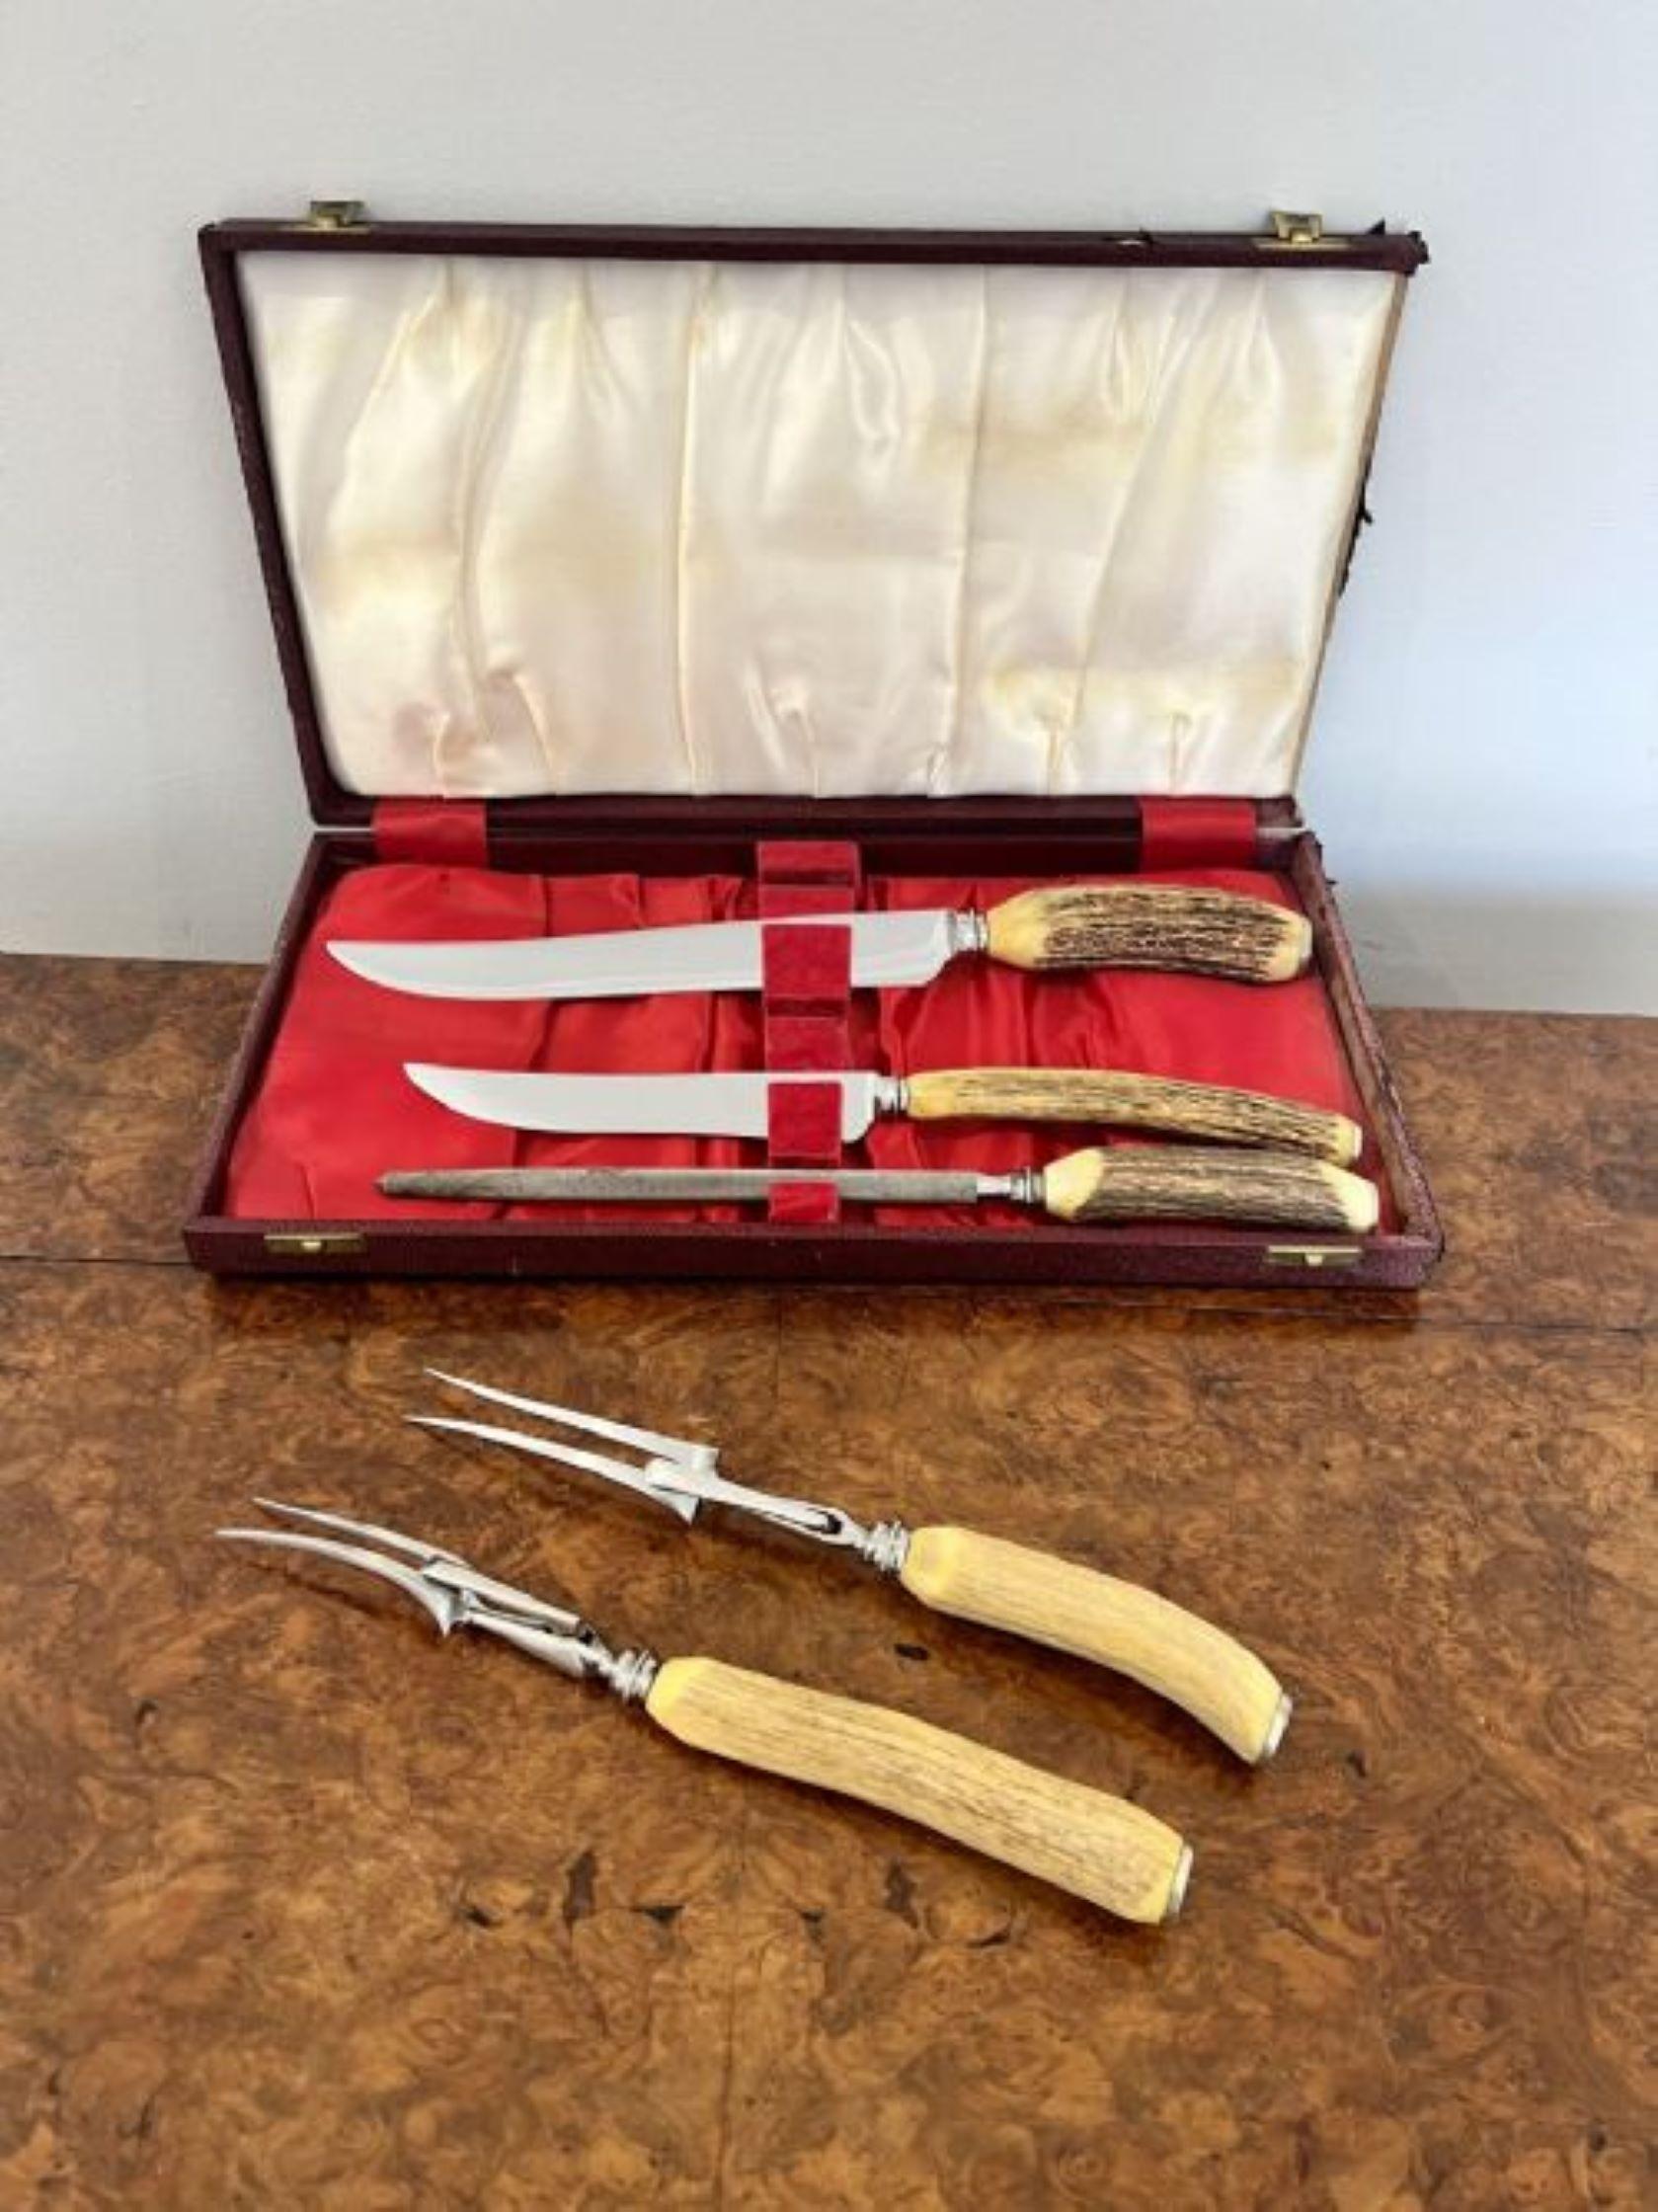 Antique five piece Cooper Brother & Son's carving set having a quality five piece carving set by Cooper Brother & Son's with antler handles (BONE) and quality Sheffield stainless steel blades in the original display box. 